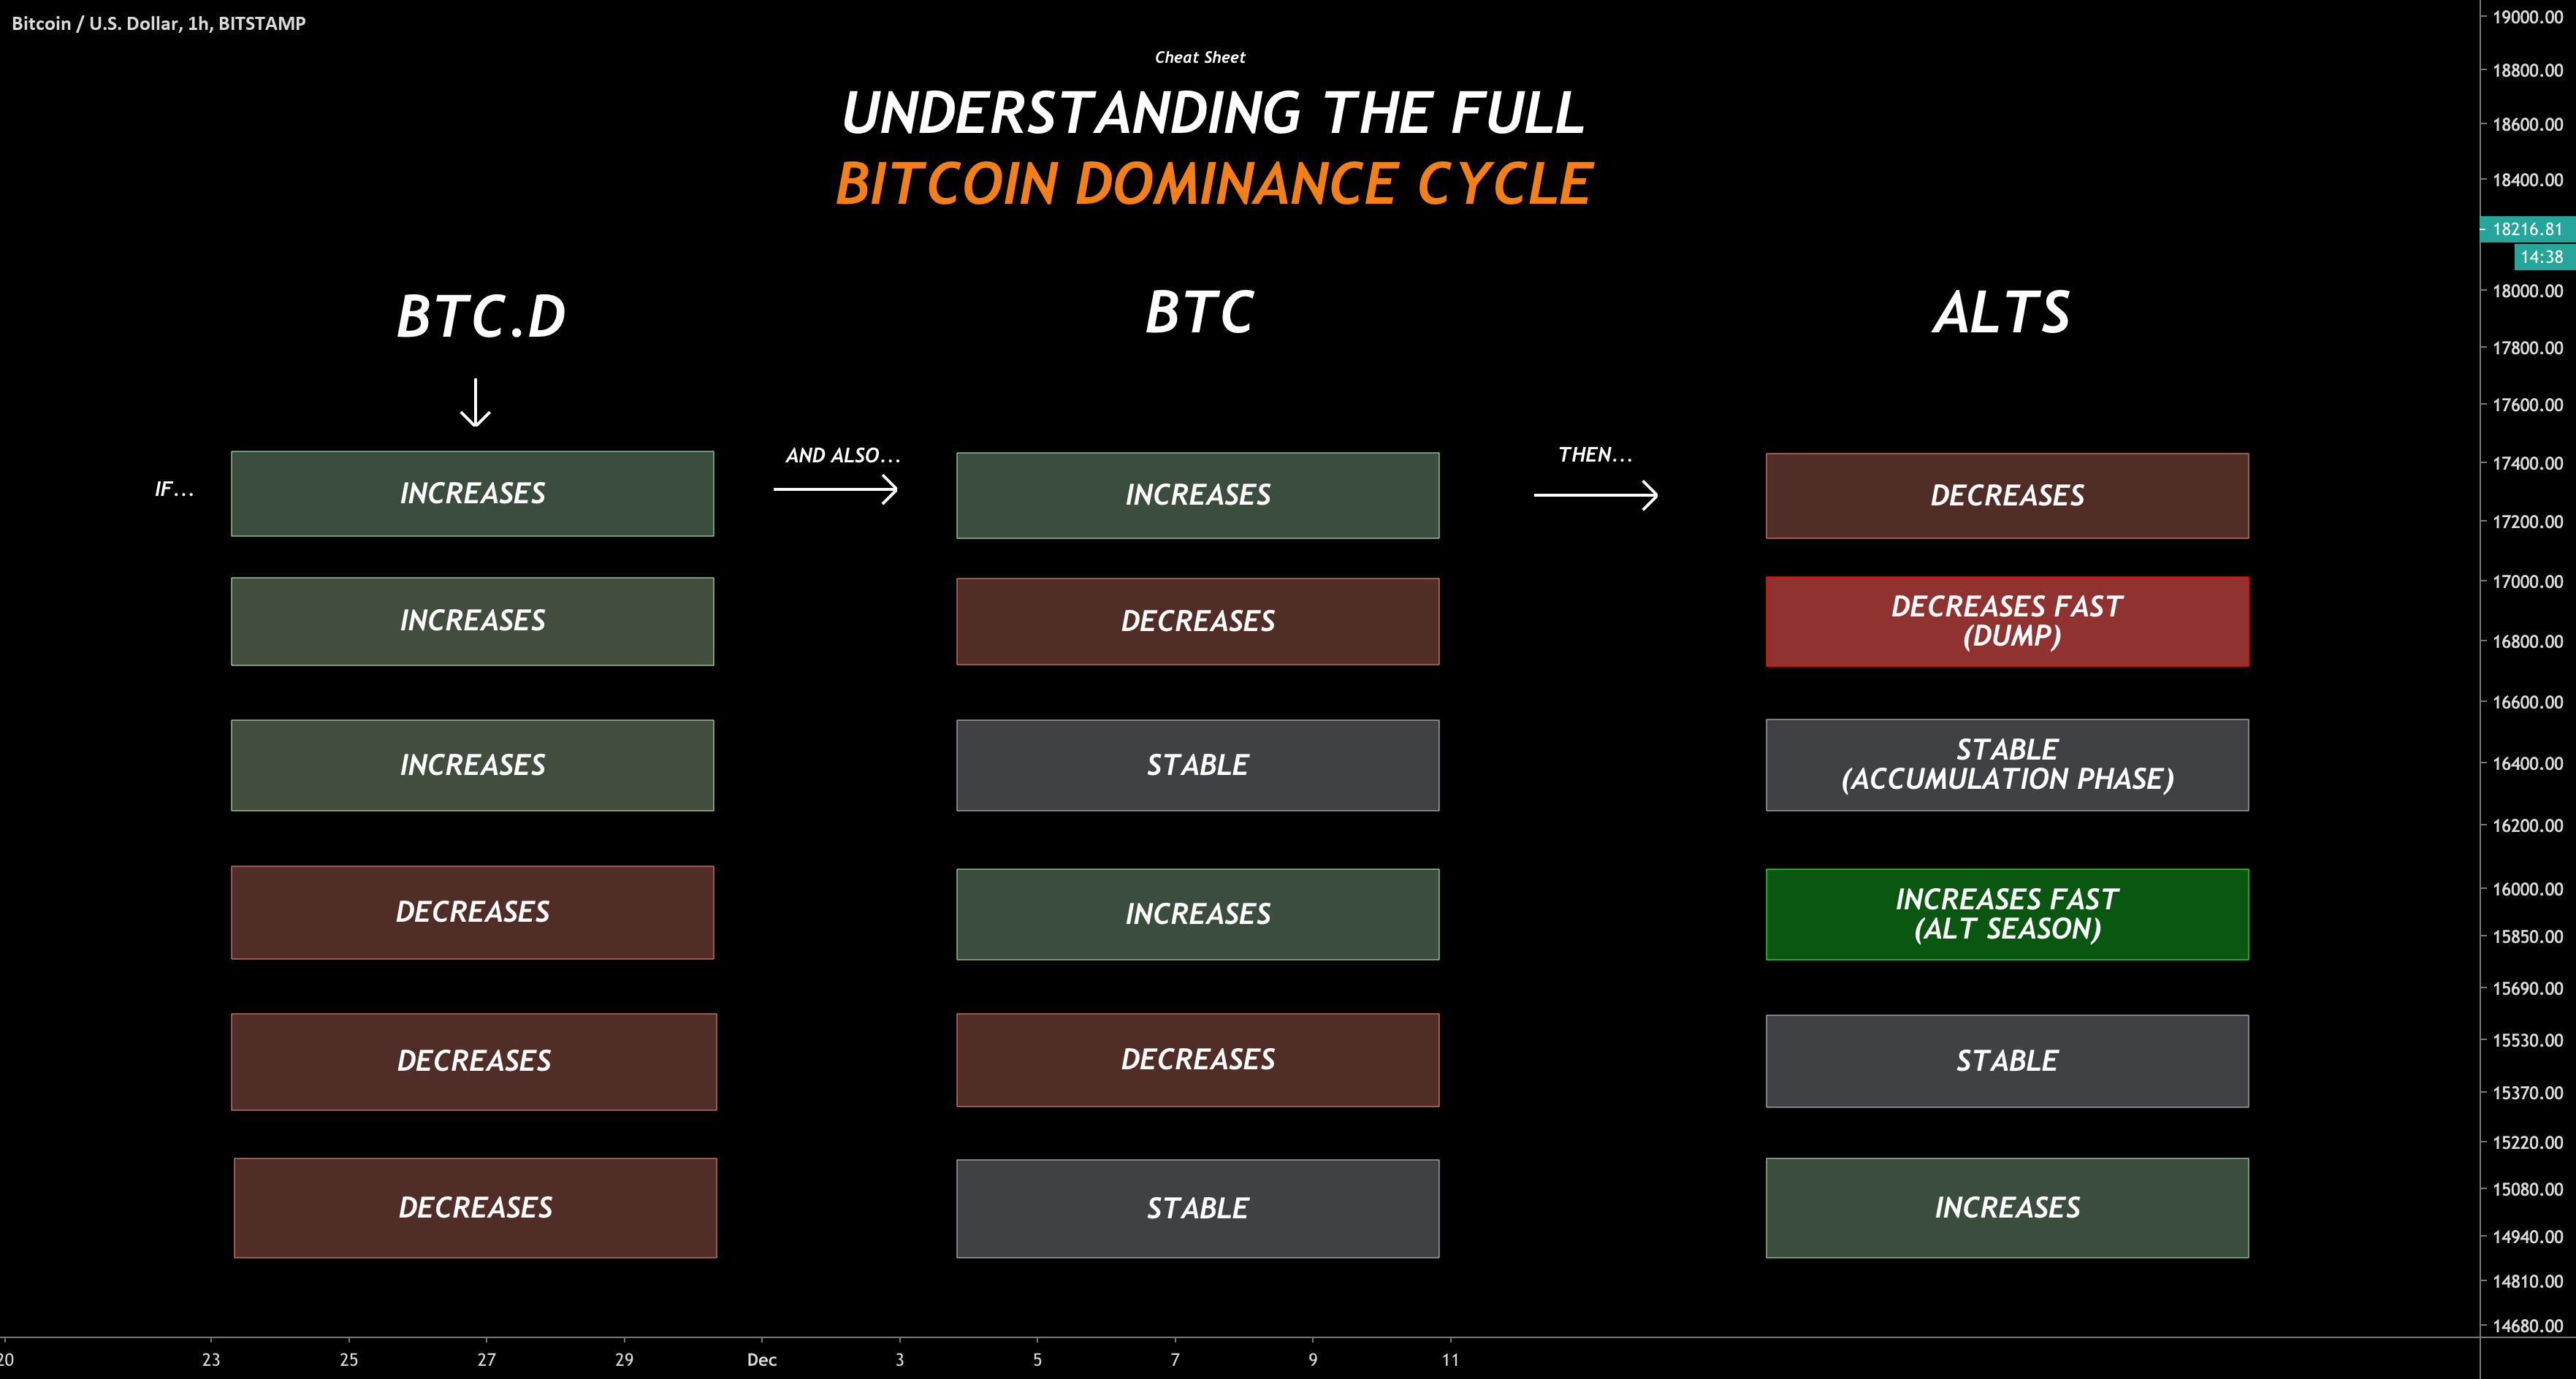 Bitcoin Dominance Chart: Check Out the BTC.D Index